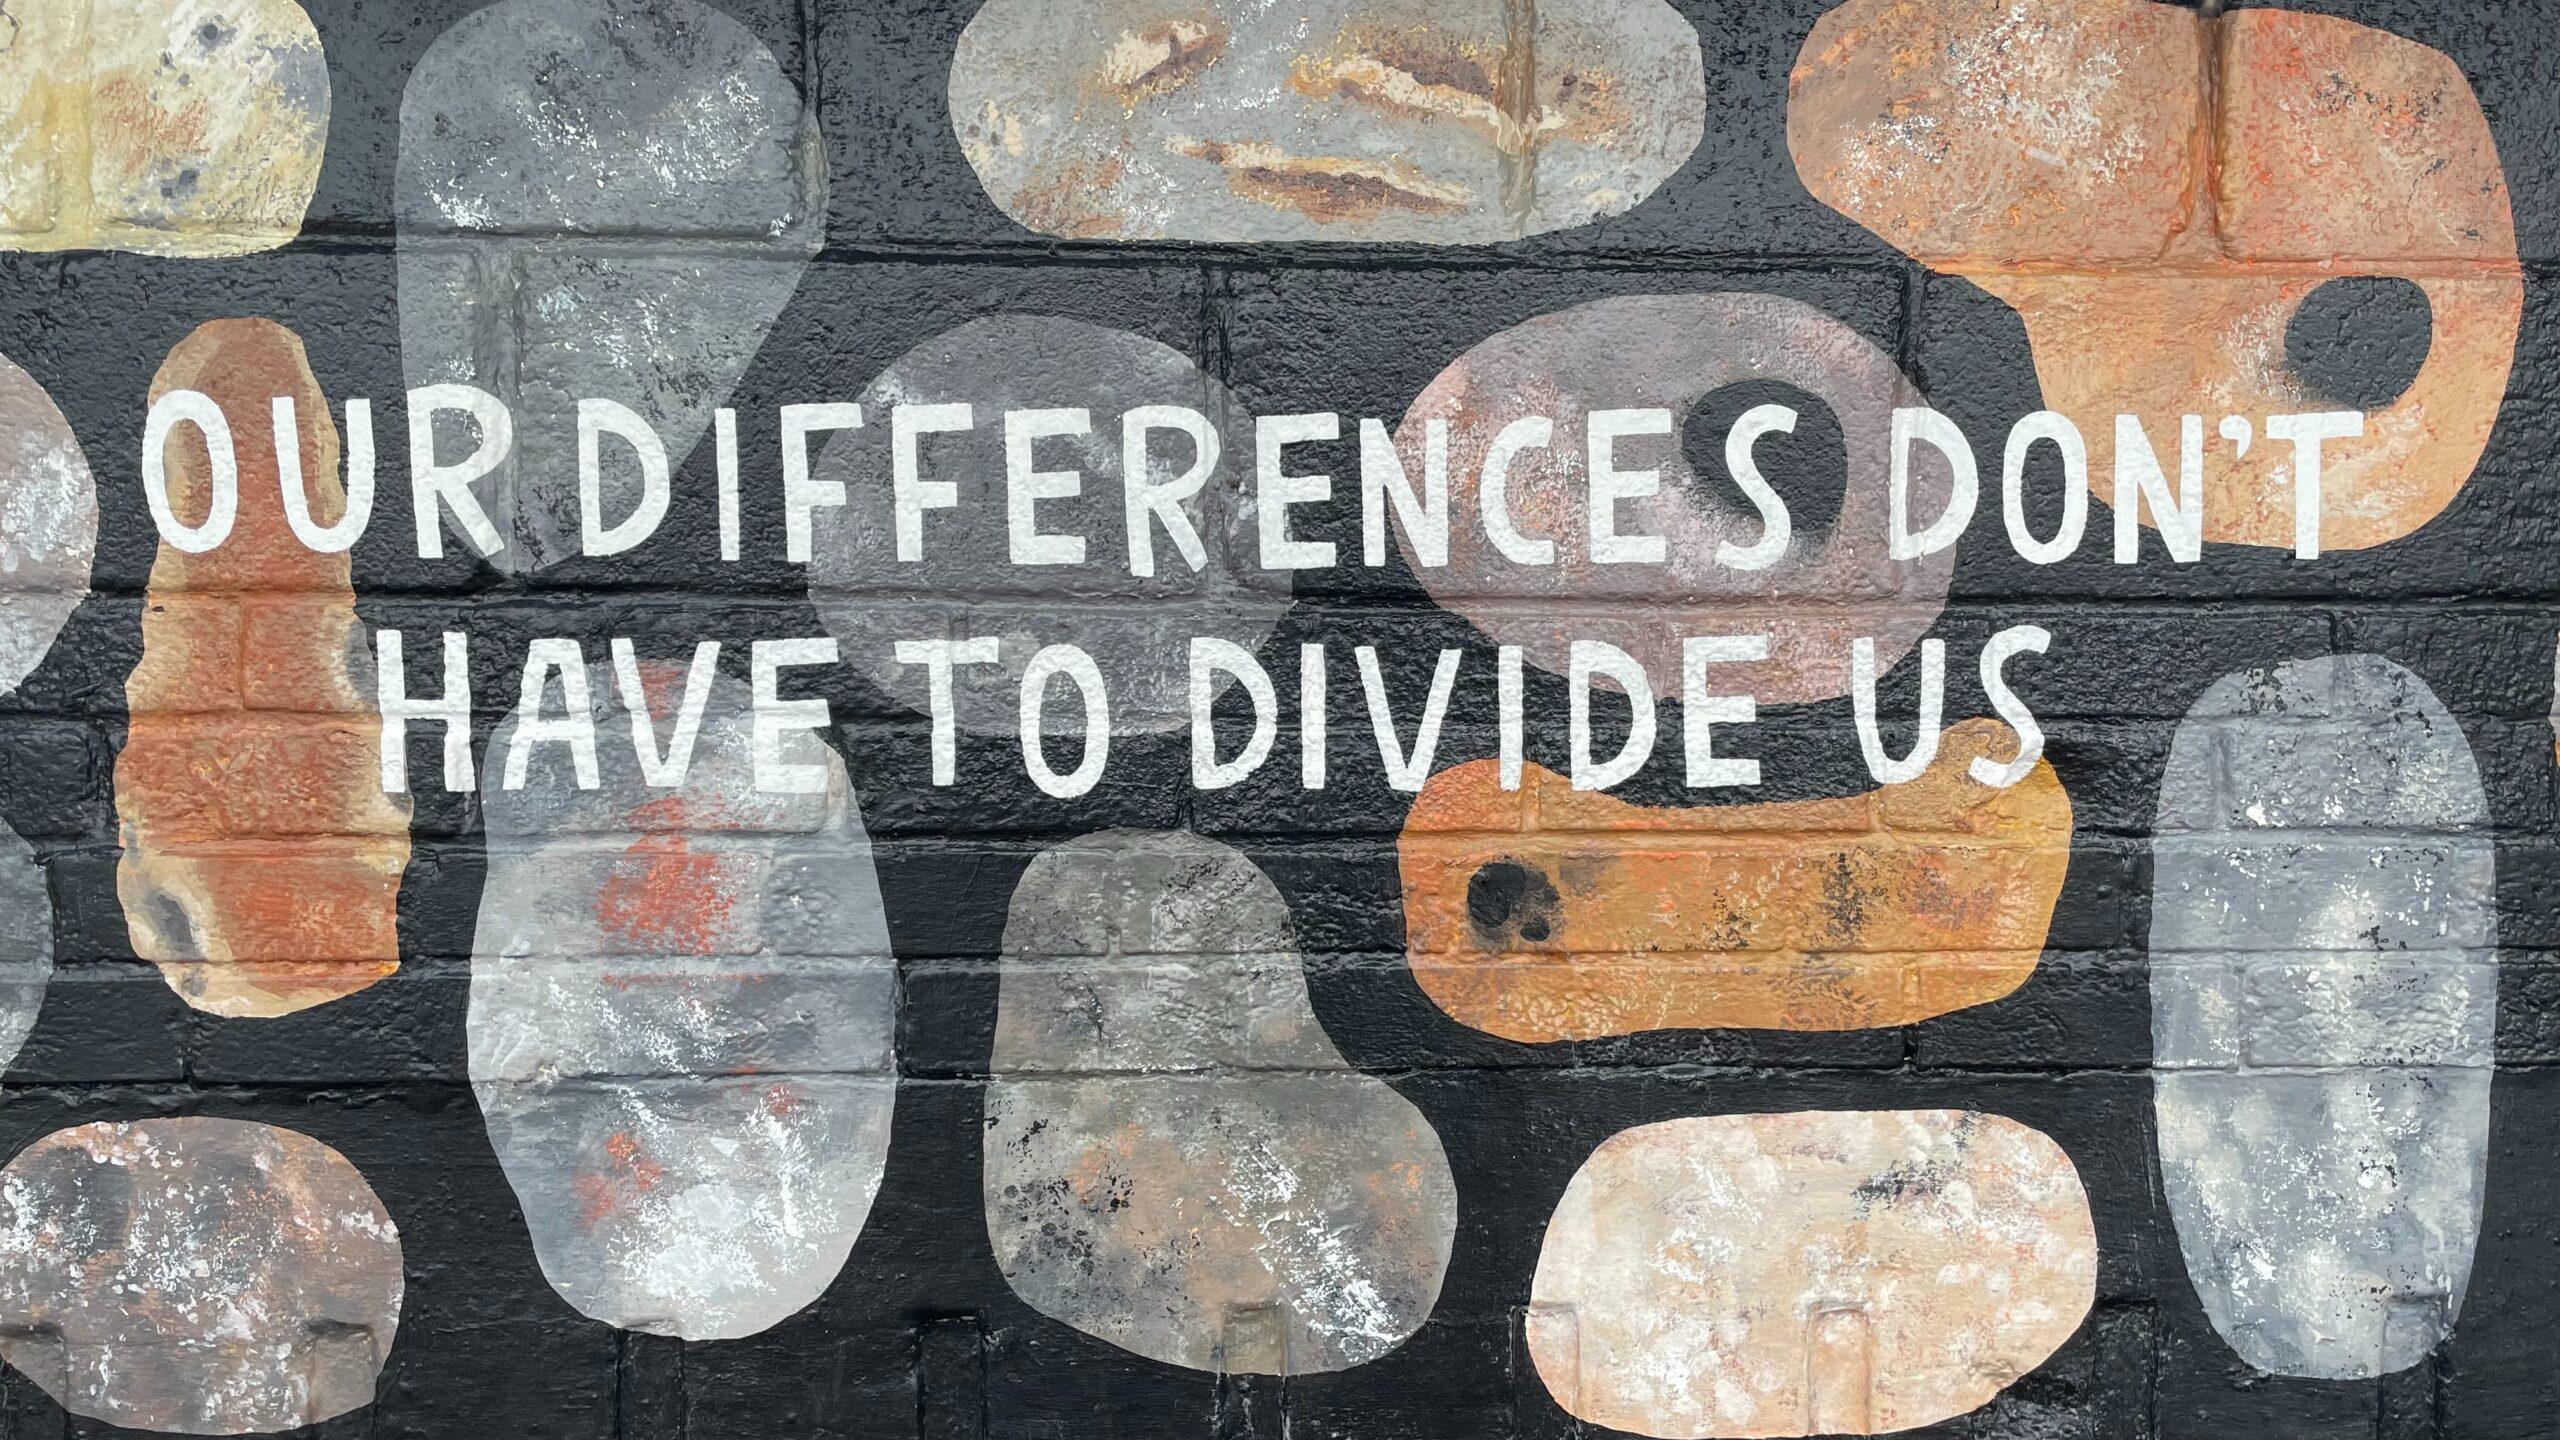 "Our difference don't have to divide us"